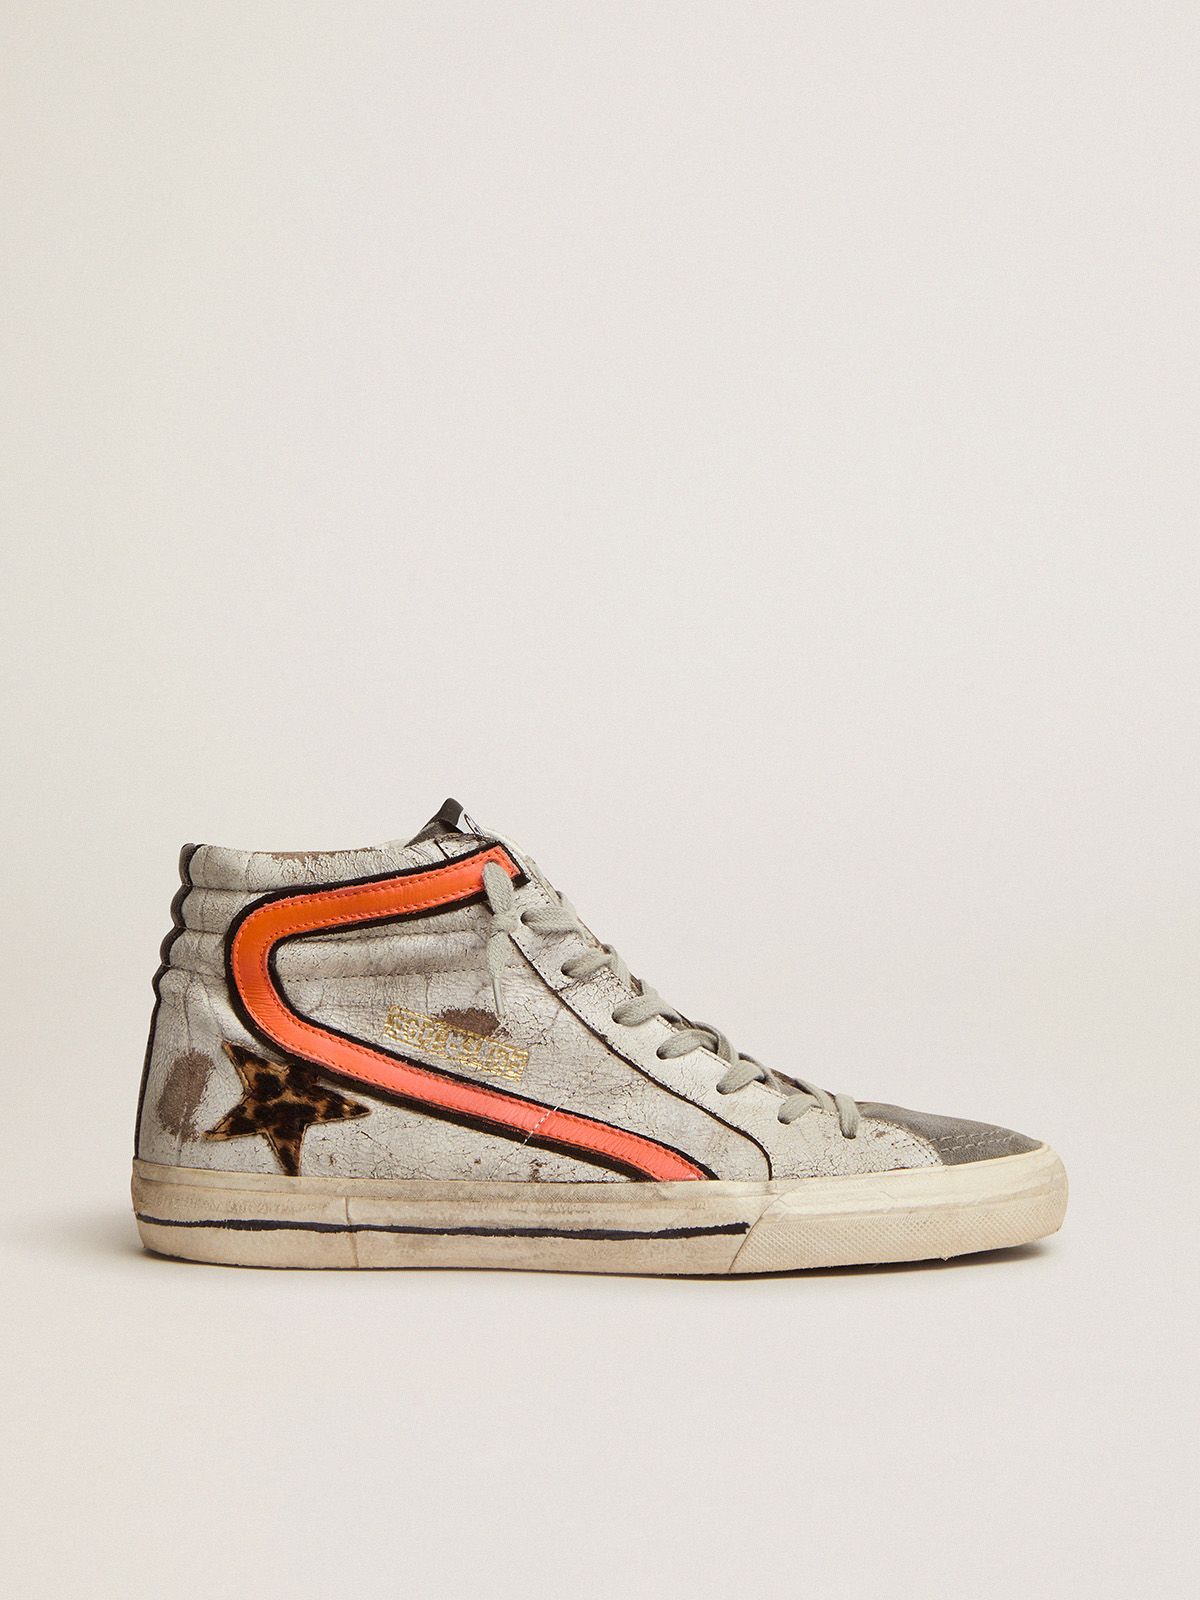 Golden Goose Donna Sneakers Slide sneakers in crackled suede with leopard-print pony skin star